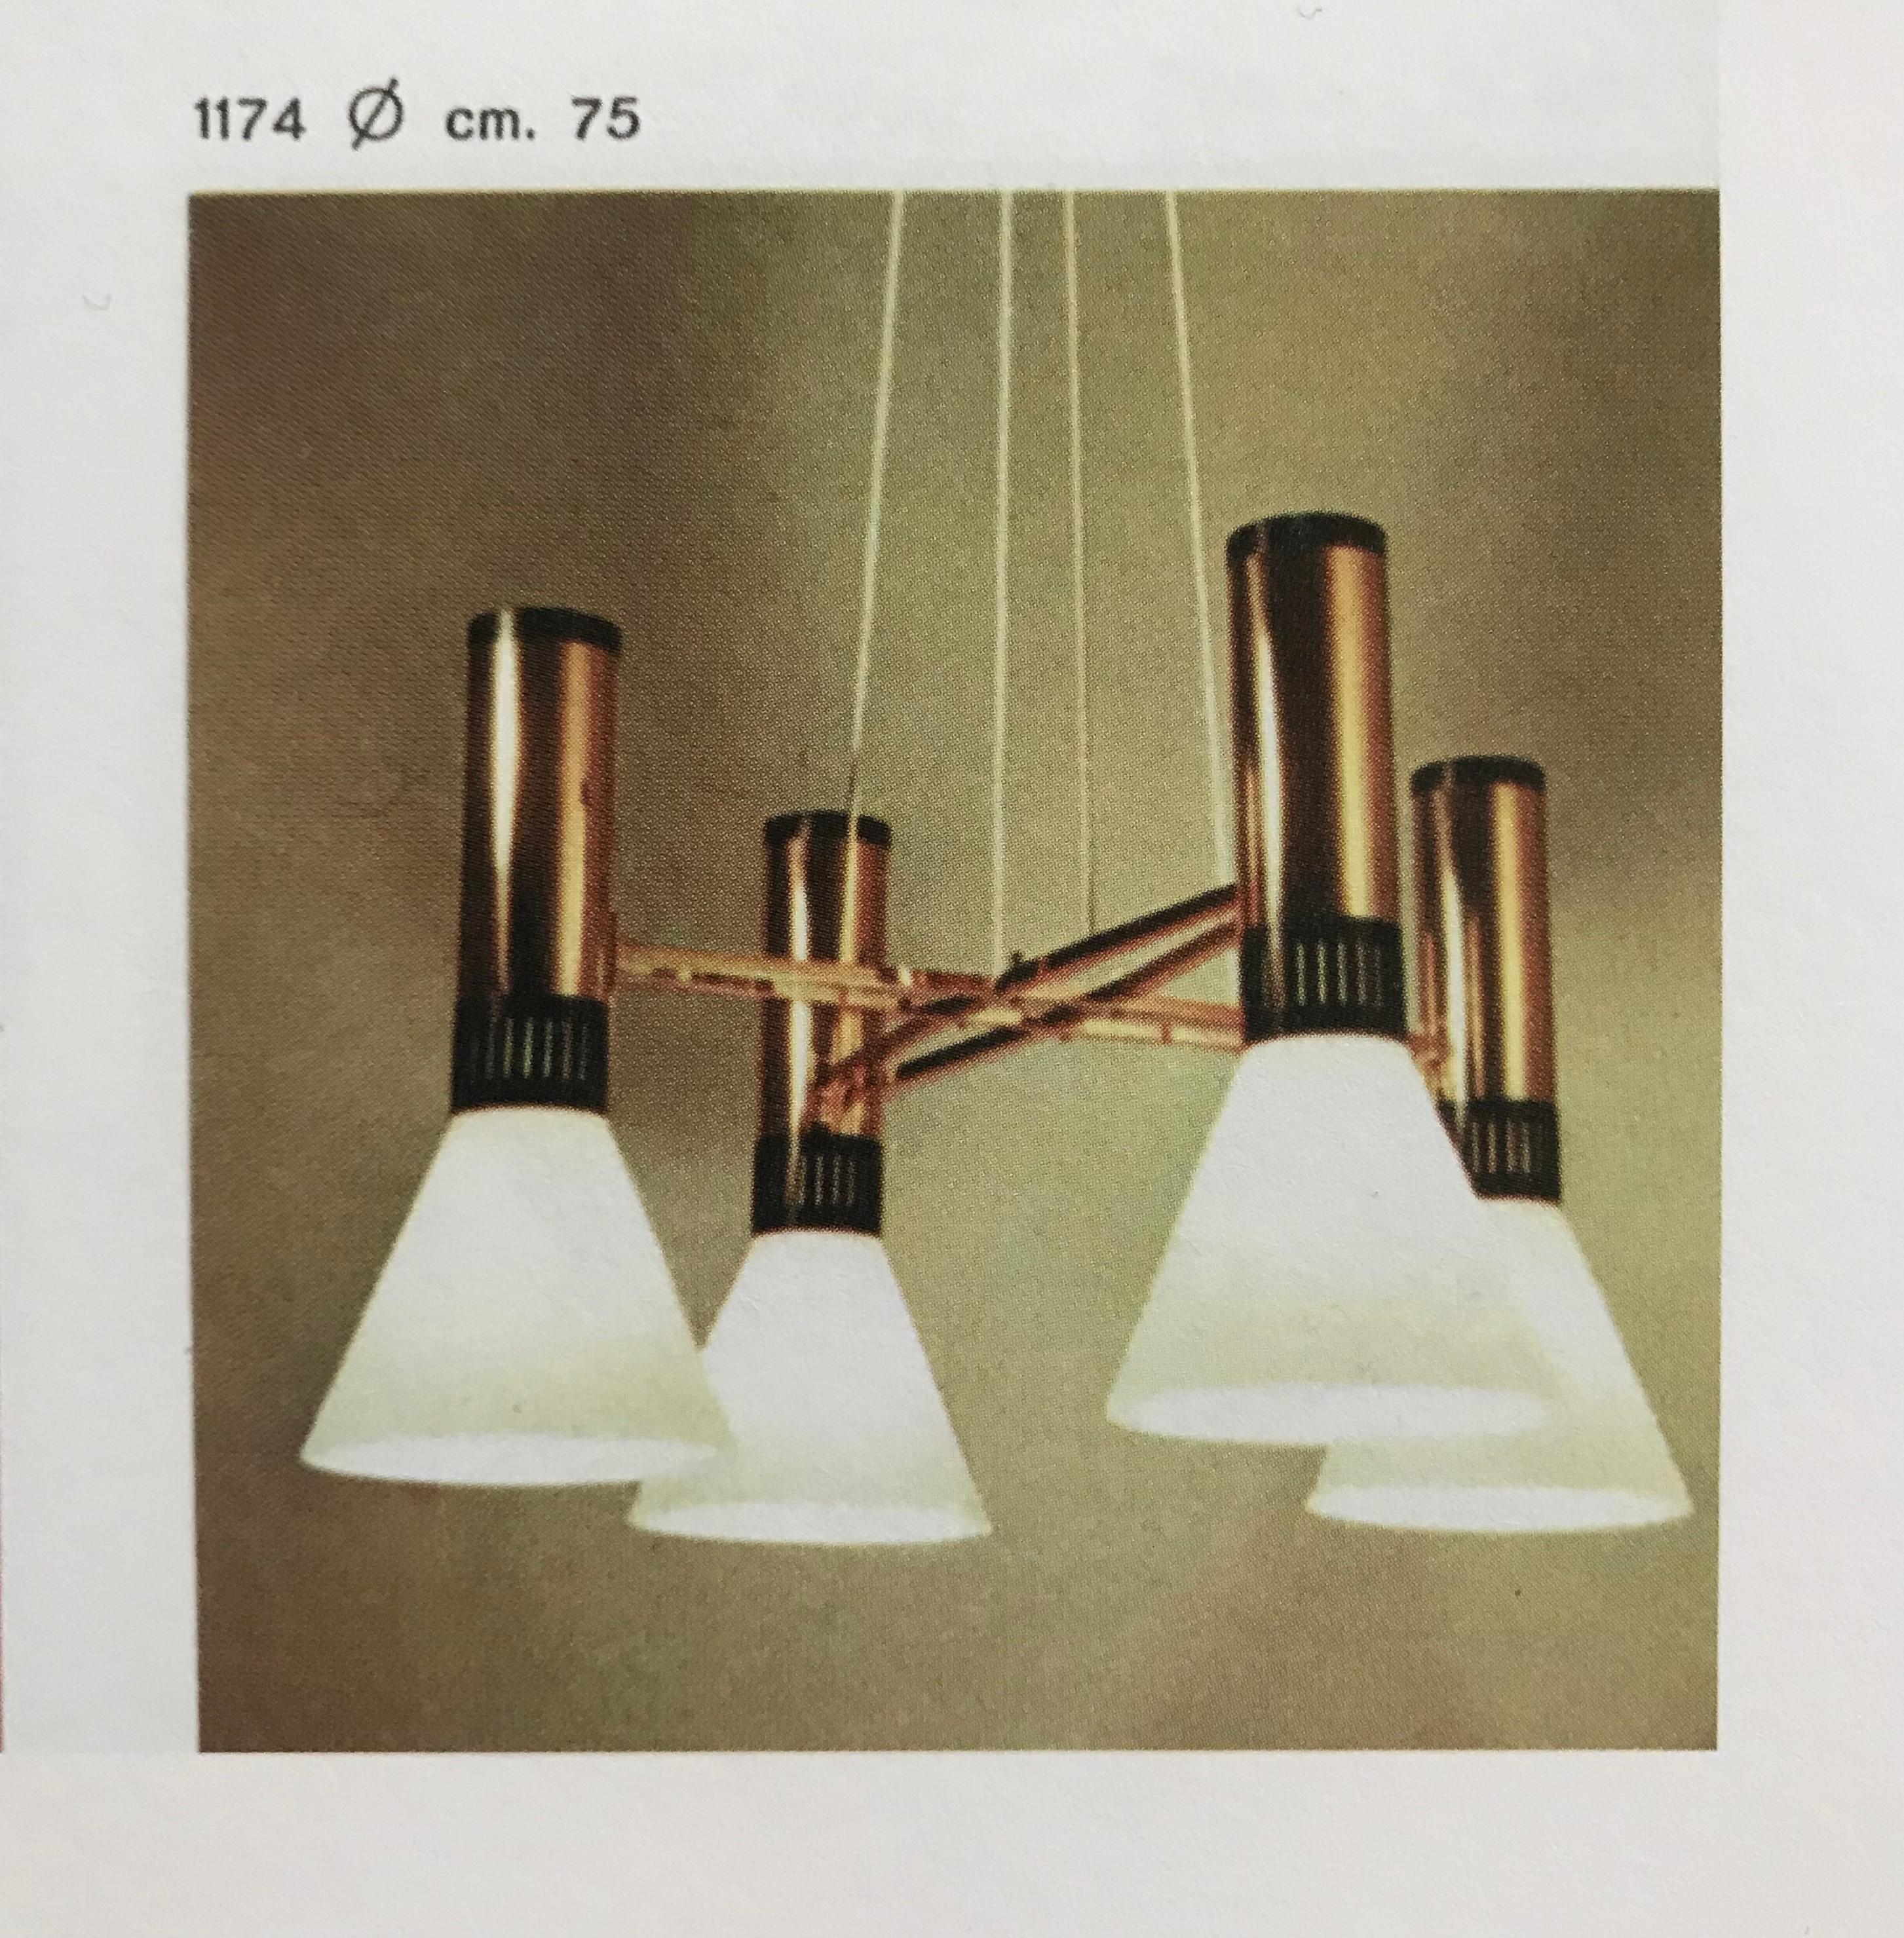 Large 1950s Stilnovo 4-cone Model #1174 chandelier. A quintessentially iconic 1950s Italian design comprised of 4 large matte 